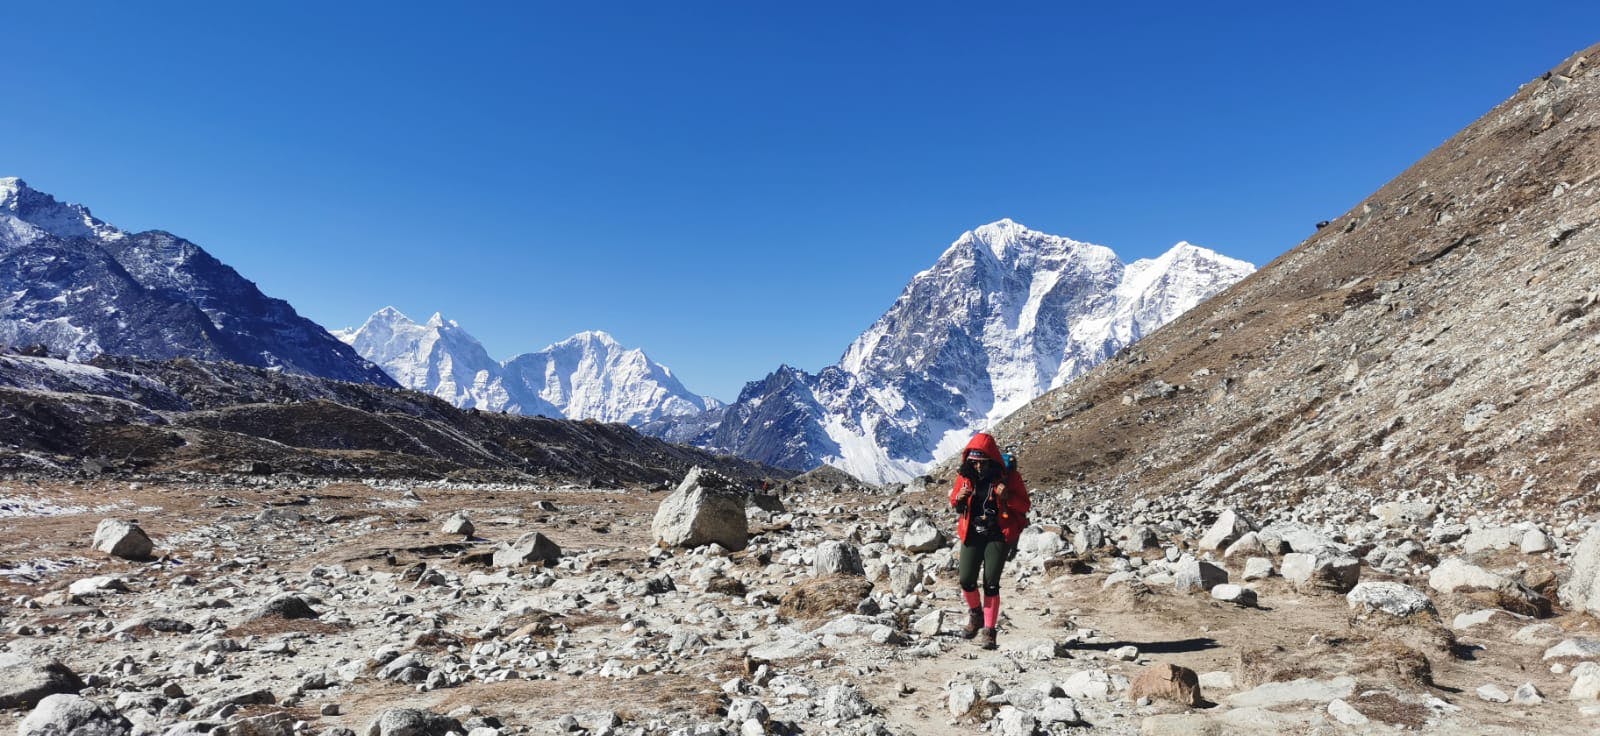 Trekking in the Everest Region: All You Need to Know